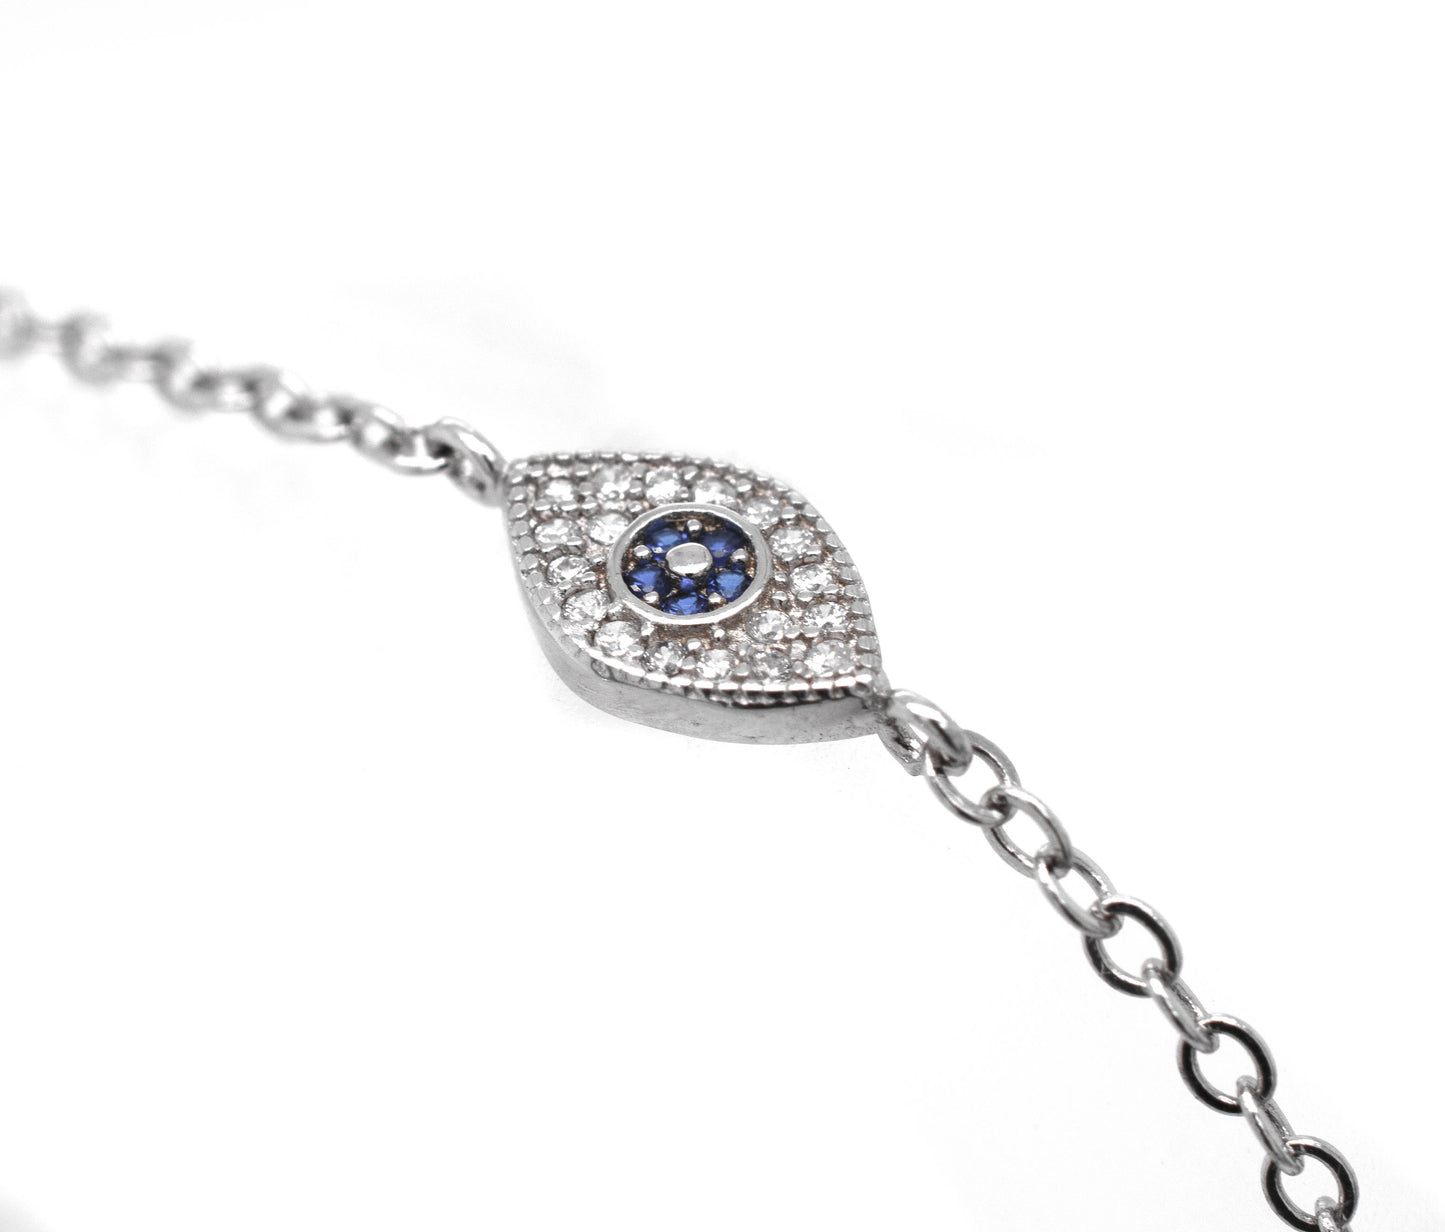 A Super Silver Classic Blue Pave Cubic Zirconia Evil Eye Bracelet, crafted in sterling silver with diamonds and blue sapphires.